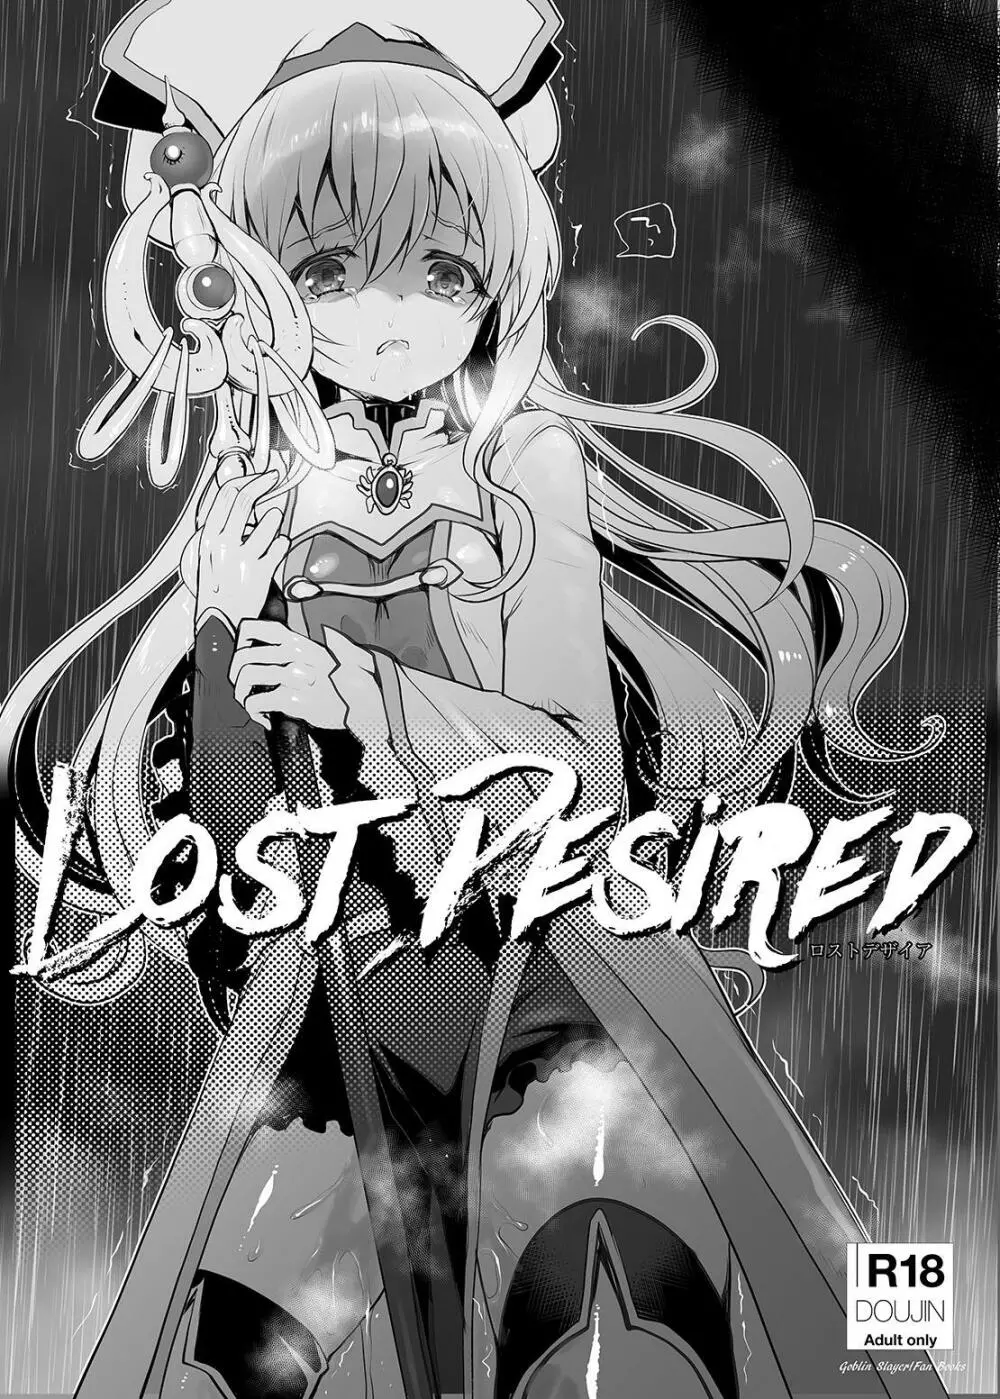 Lost Desired